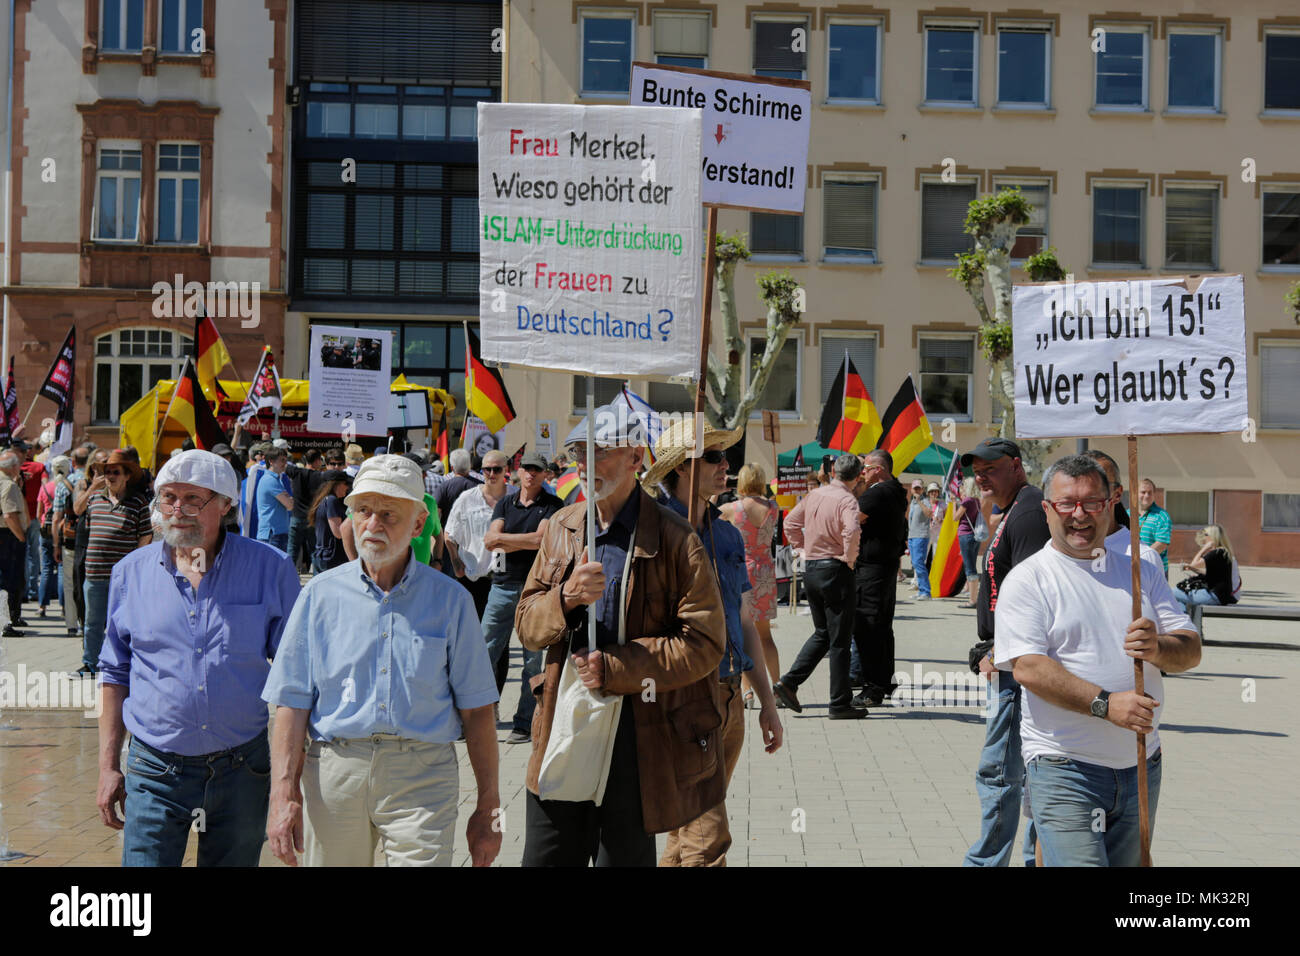 Germersheim, Germany. 6th May 2018. Right-wing protesters carry placards and shout slogans at the counter protesters. Around 100 from different right-wing organisations protested in the city of Germersheim against Angela Merkel and for the security of women and children, which they see at risk by refugees and foreigners. They also called for the introduction of mandatory age checks (DNA test) by underage refugees. Credit: Michael Debets/Alamy Live News Stock Photo